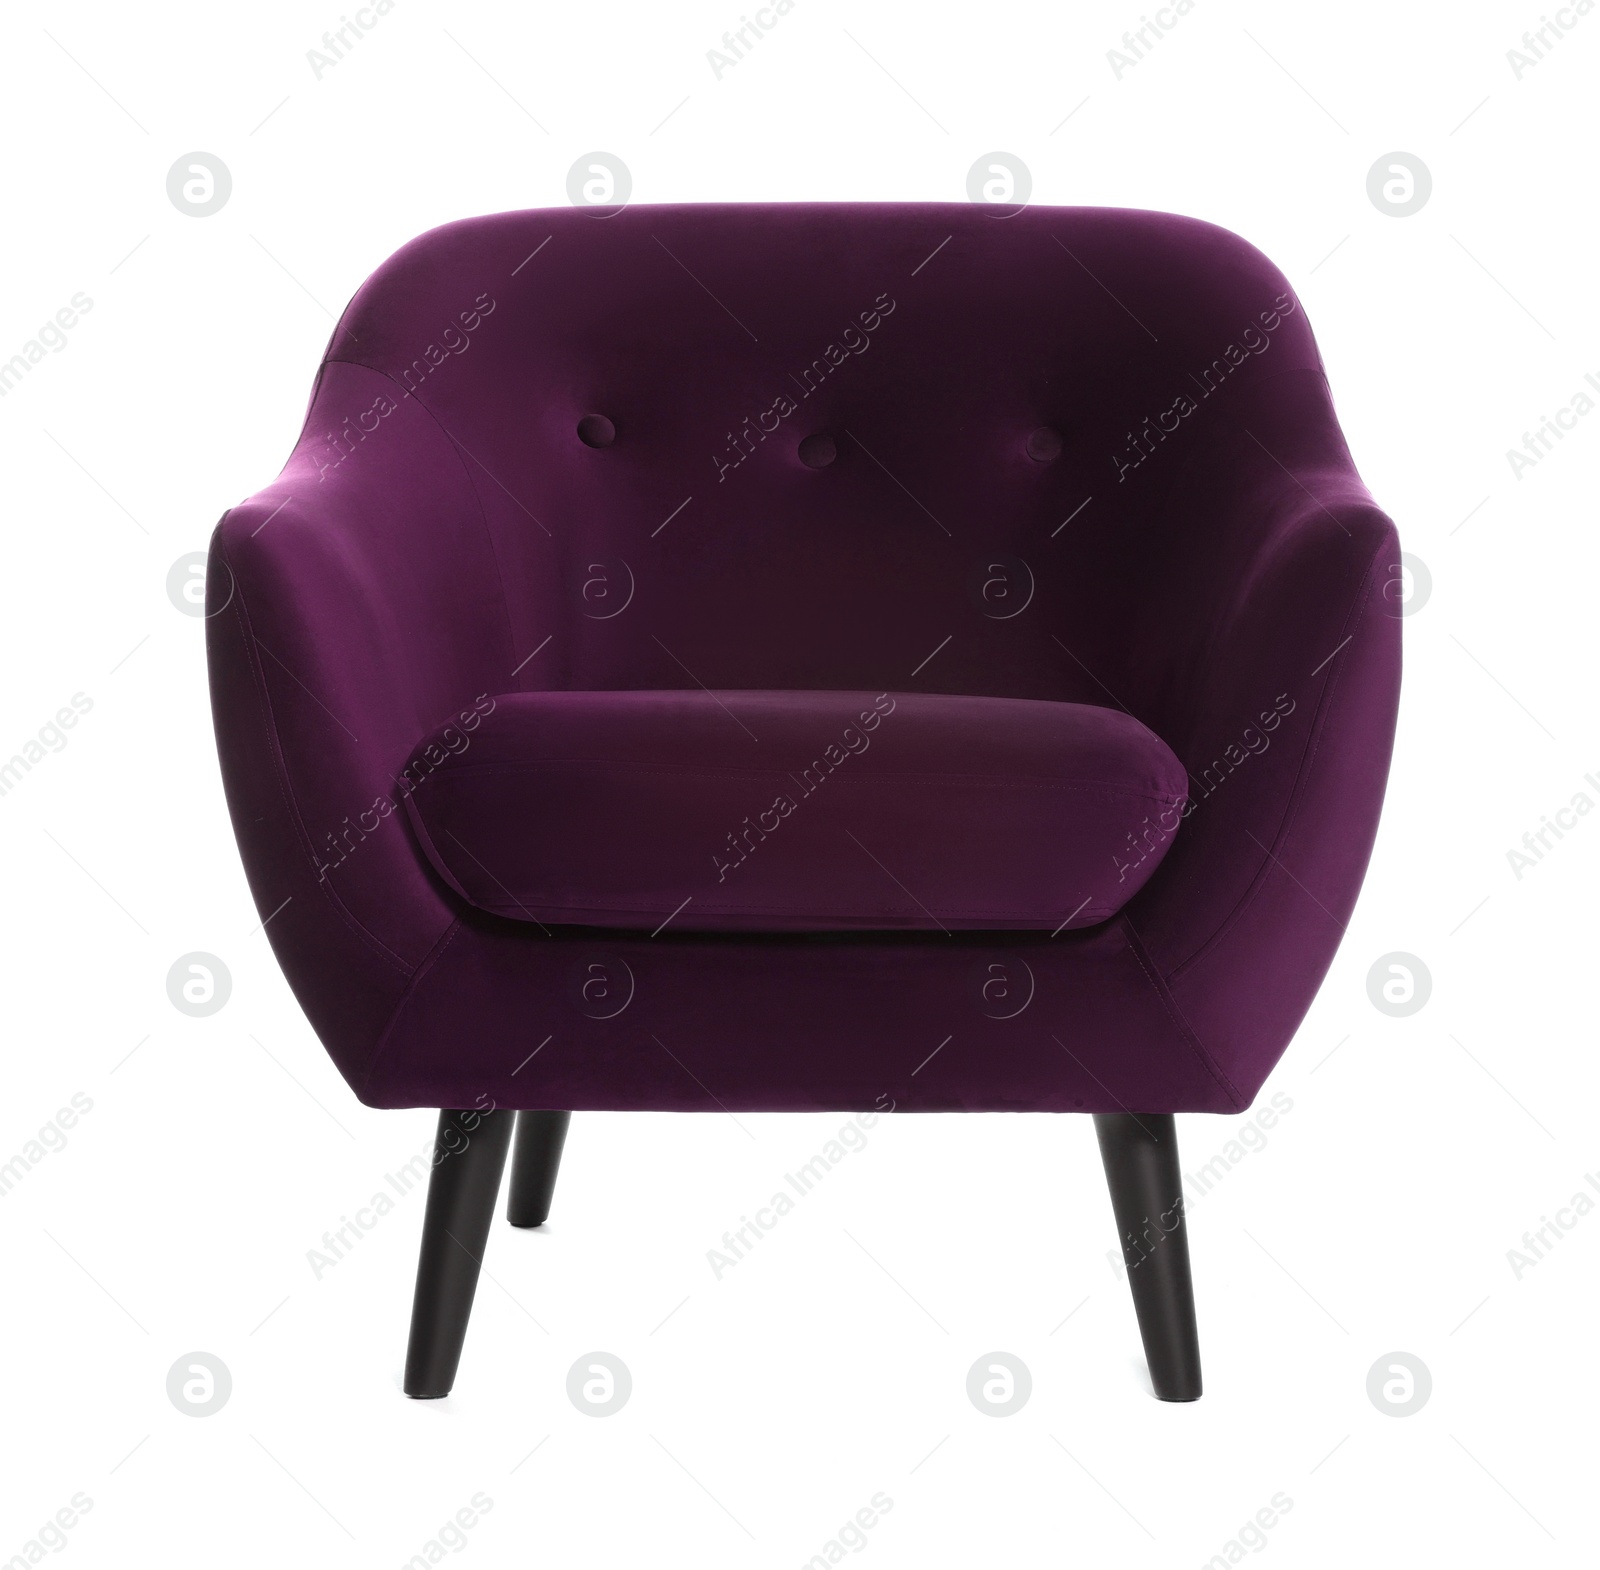 Image of One comfortable dark purple armchair isolated on white